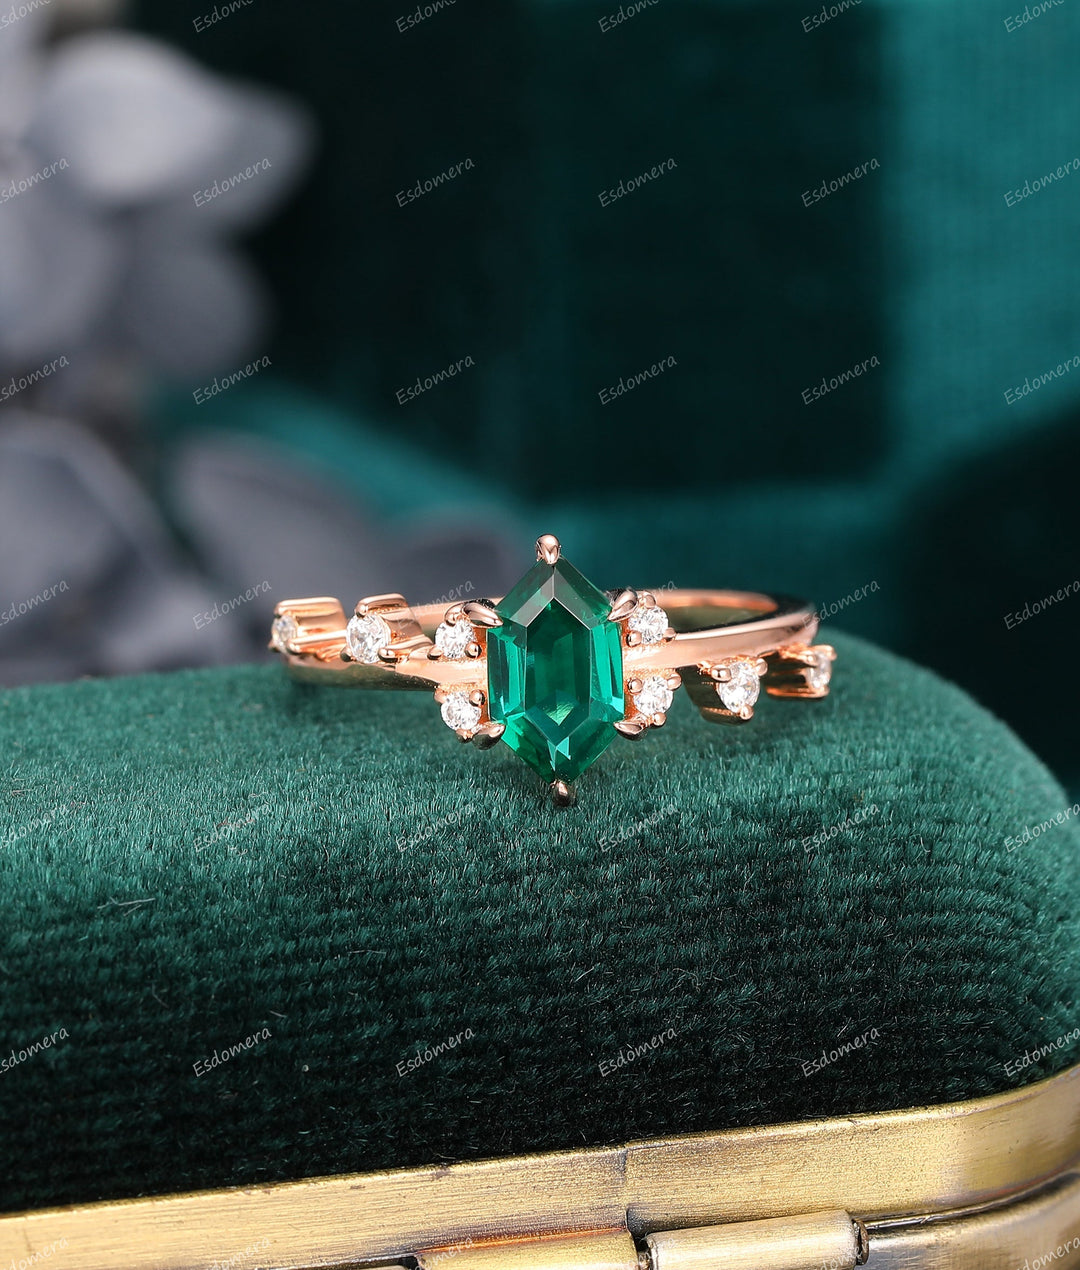 1.10CT Hexagon Cut Emerald Engagement Ring, Art Deco Soild 14k Gold Wedding Ring, Personalized Birthday Gift For Her